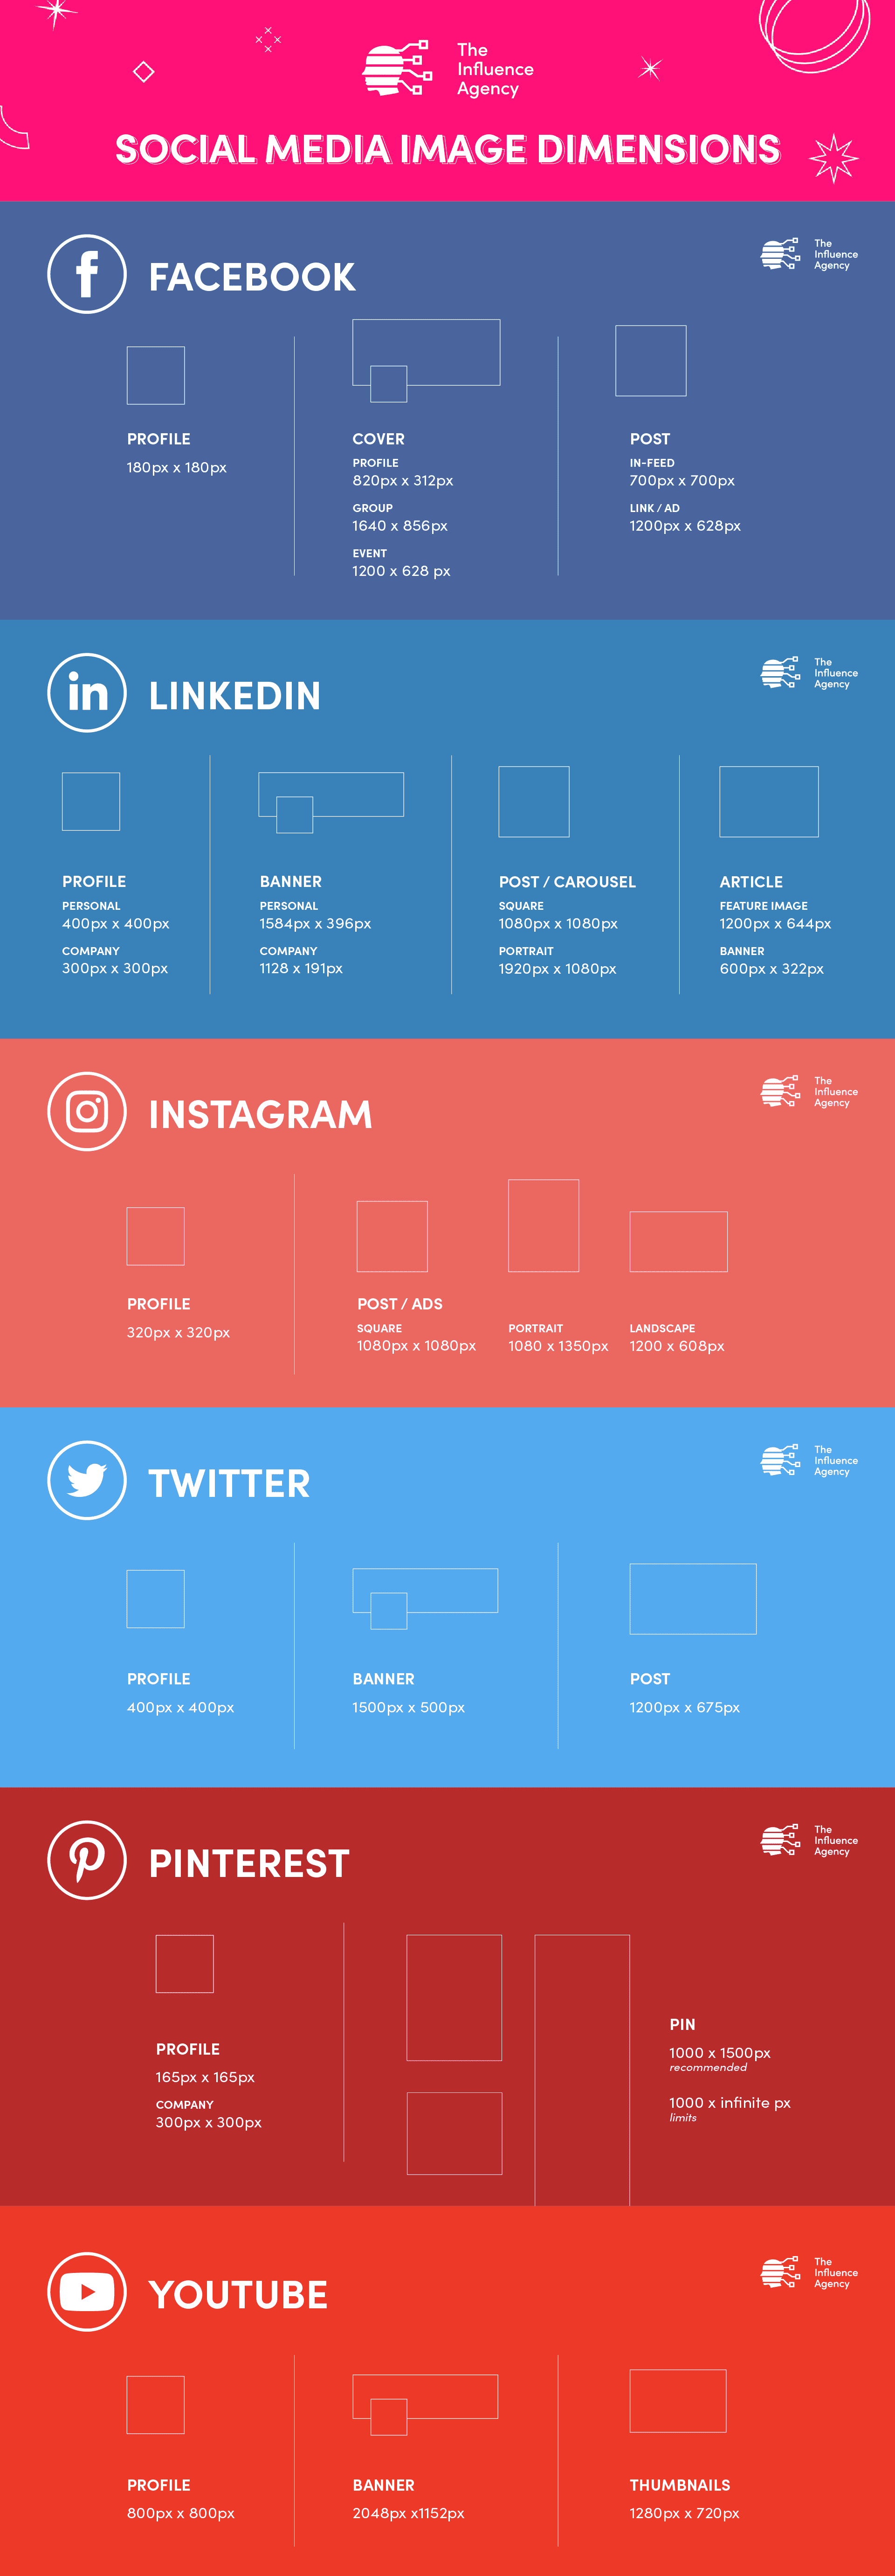 Diagram of all your social media image dimensions